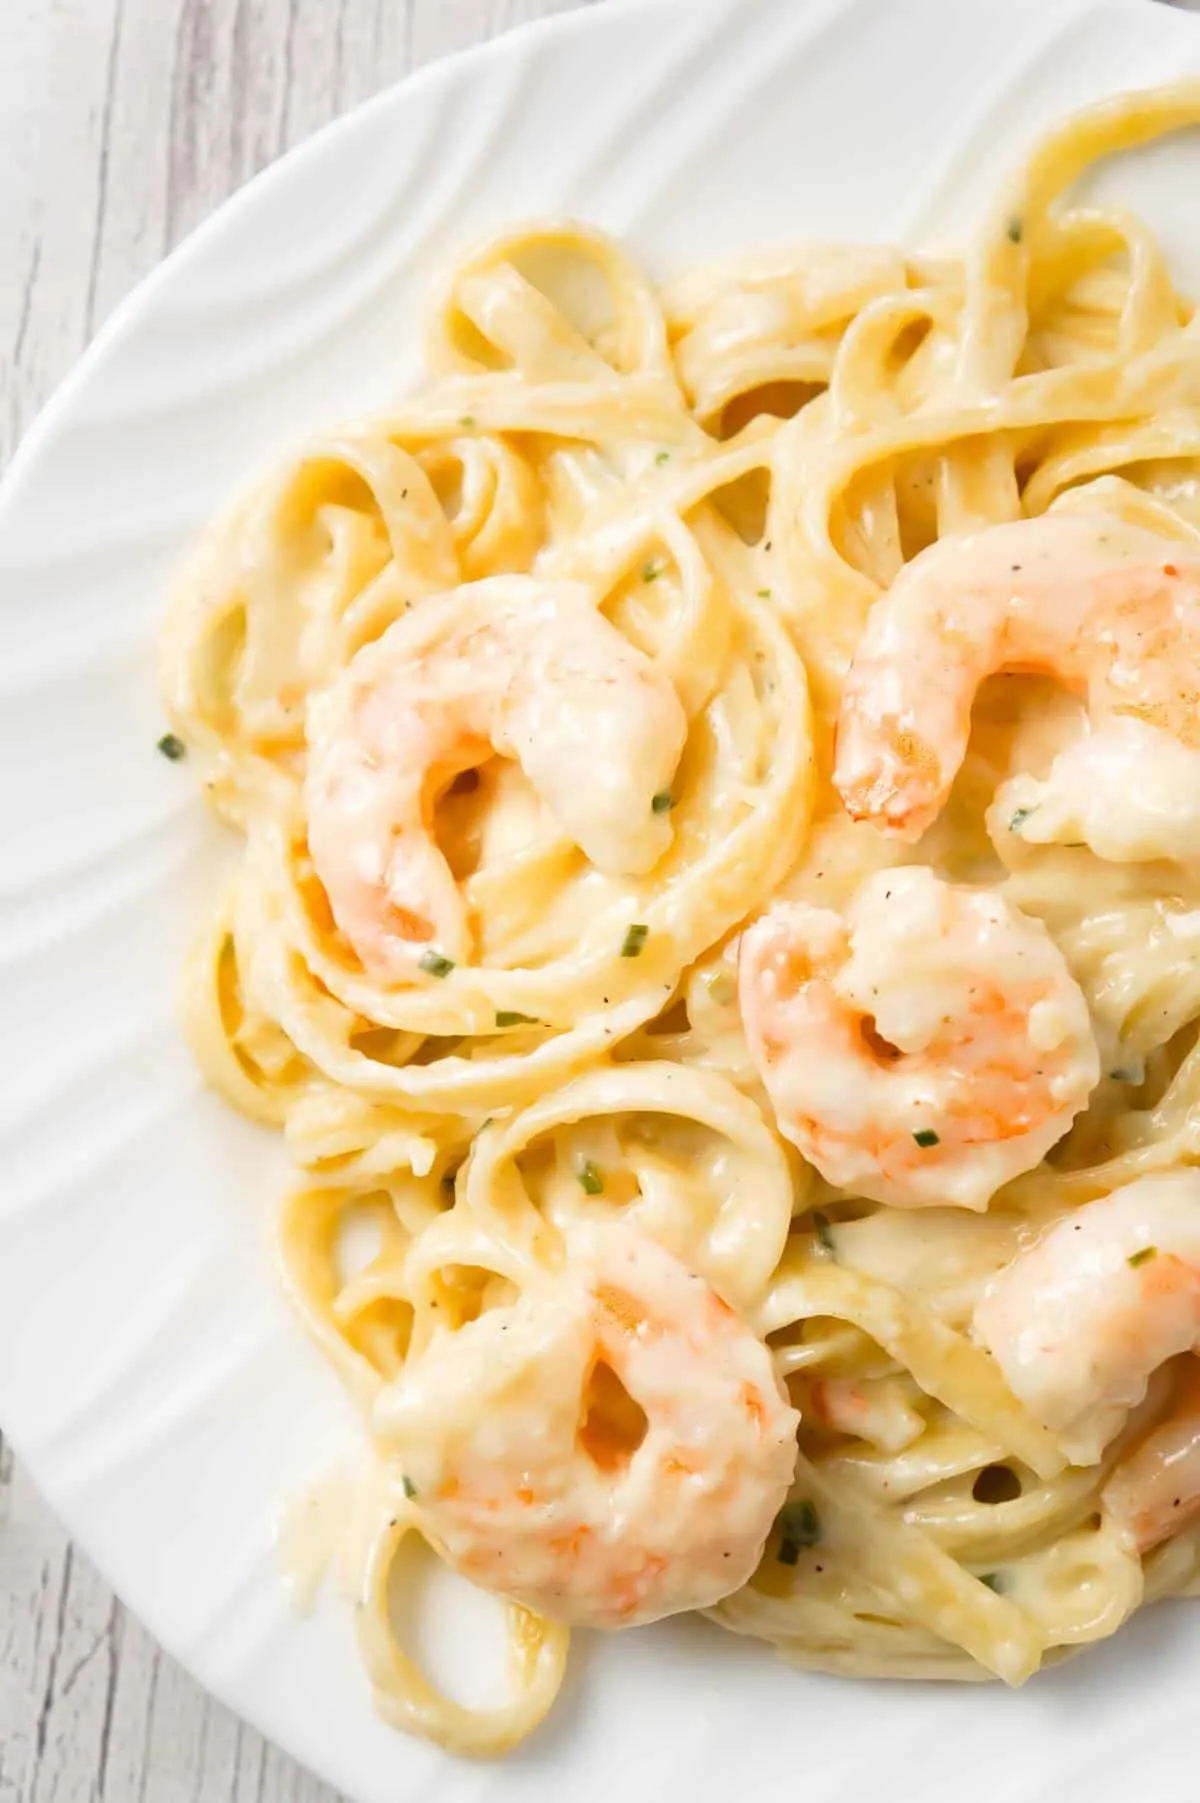 Fettuccine Alfredo with Shrimp is a delicious seafood pasta recipe with a creamy garlic parmesan sauce.